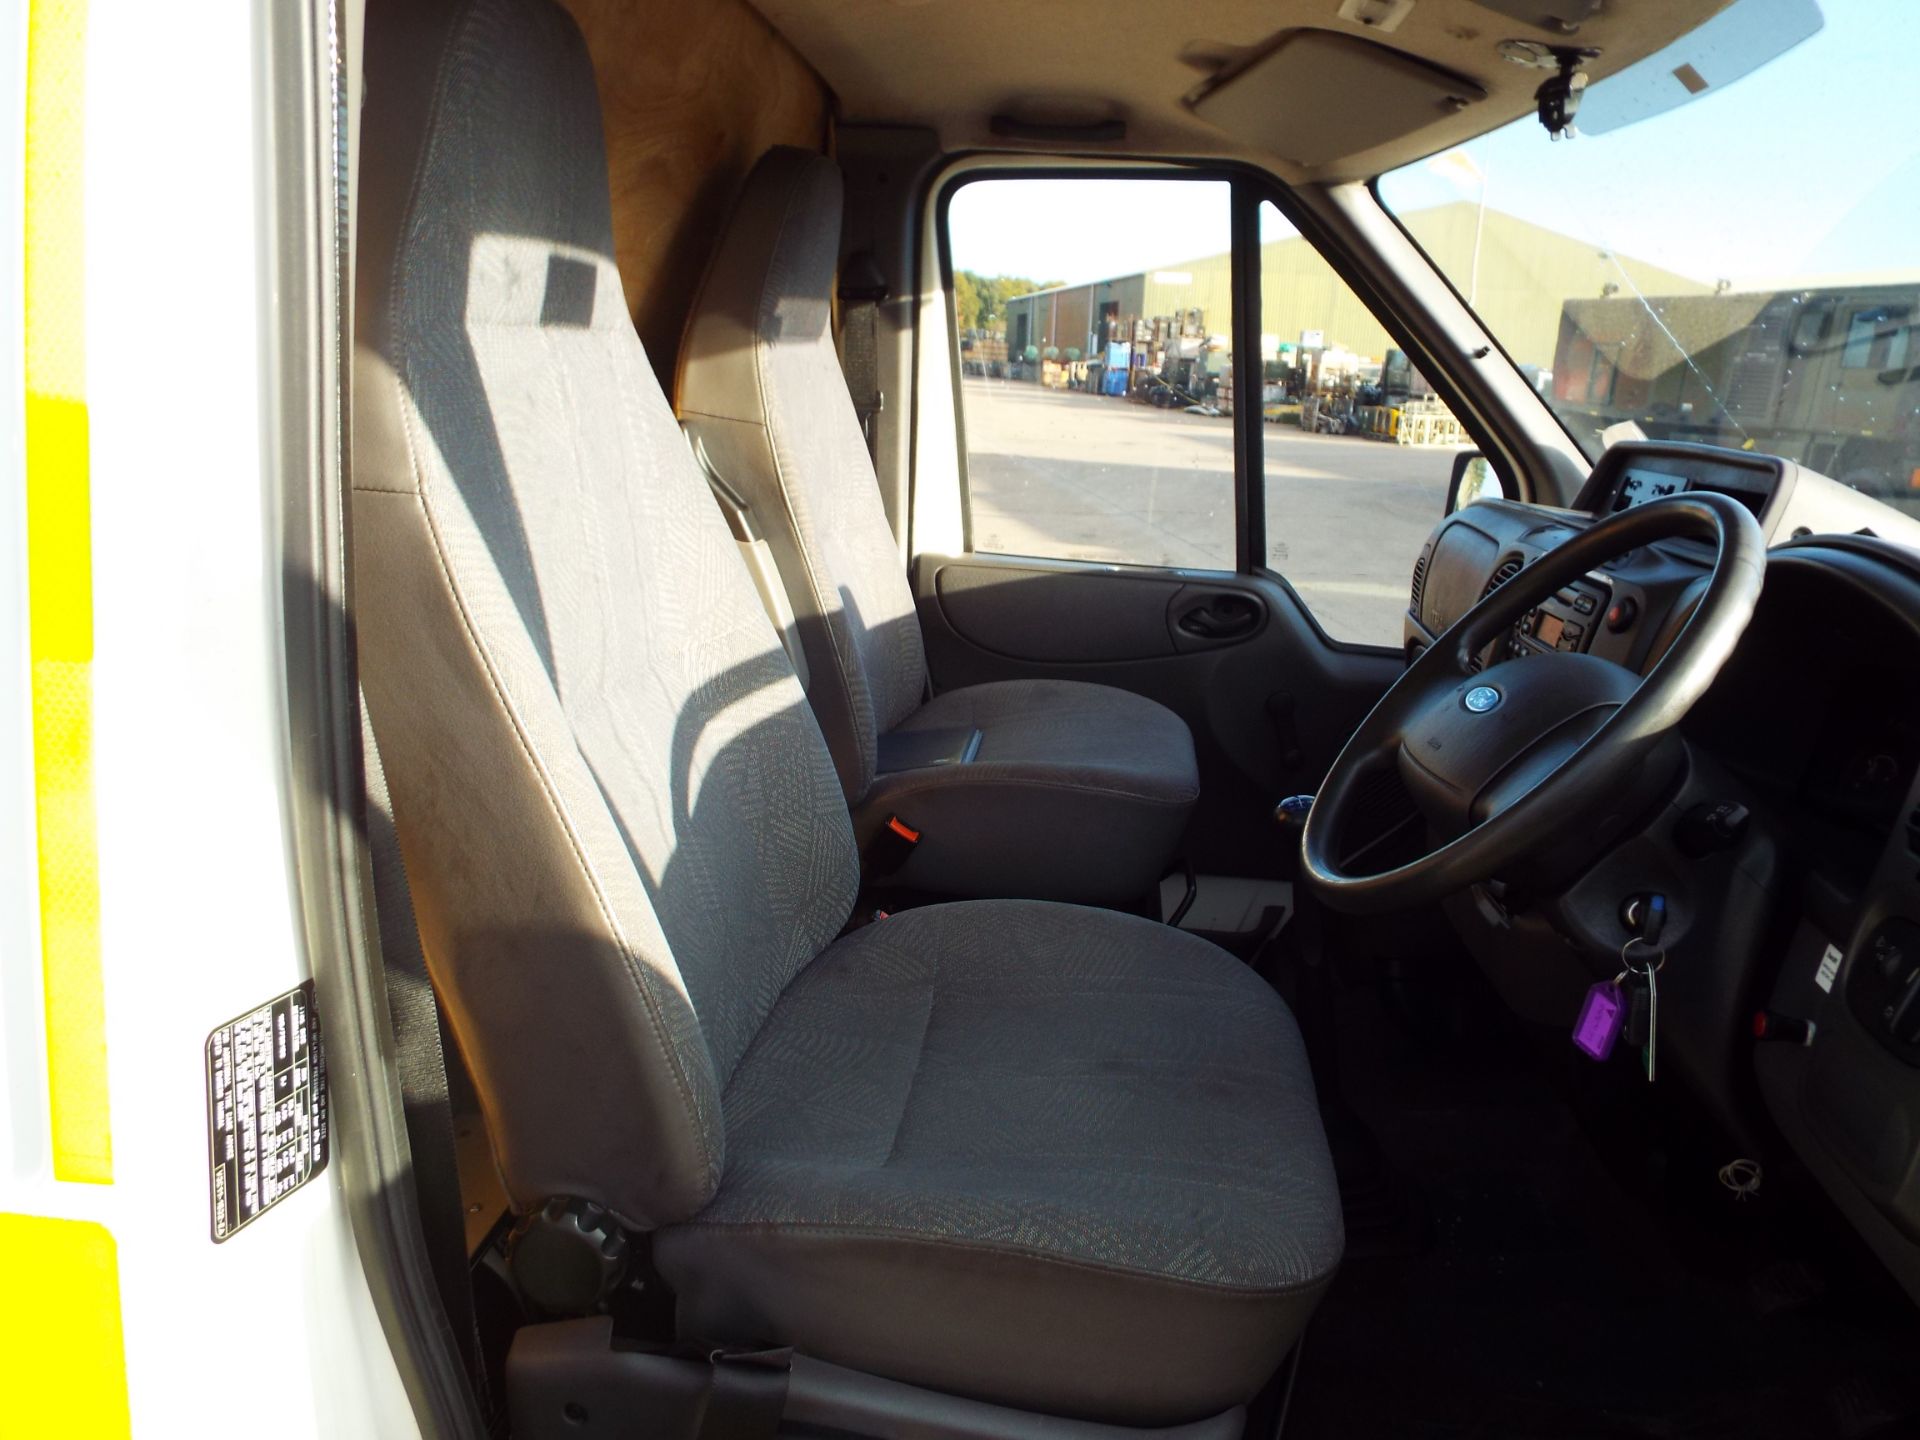 Ford Transit 125 T430 with Tail Lift - Only 35,828 miles! - Image 11 of 23